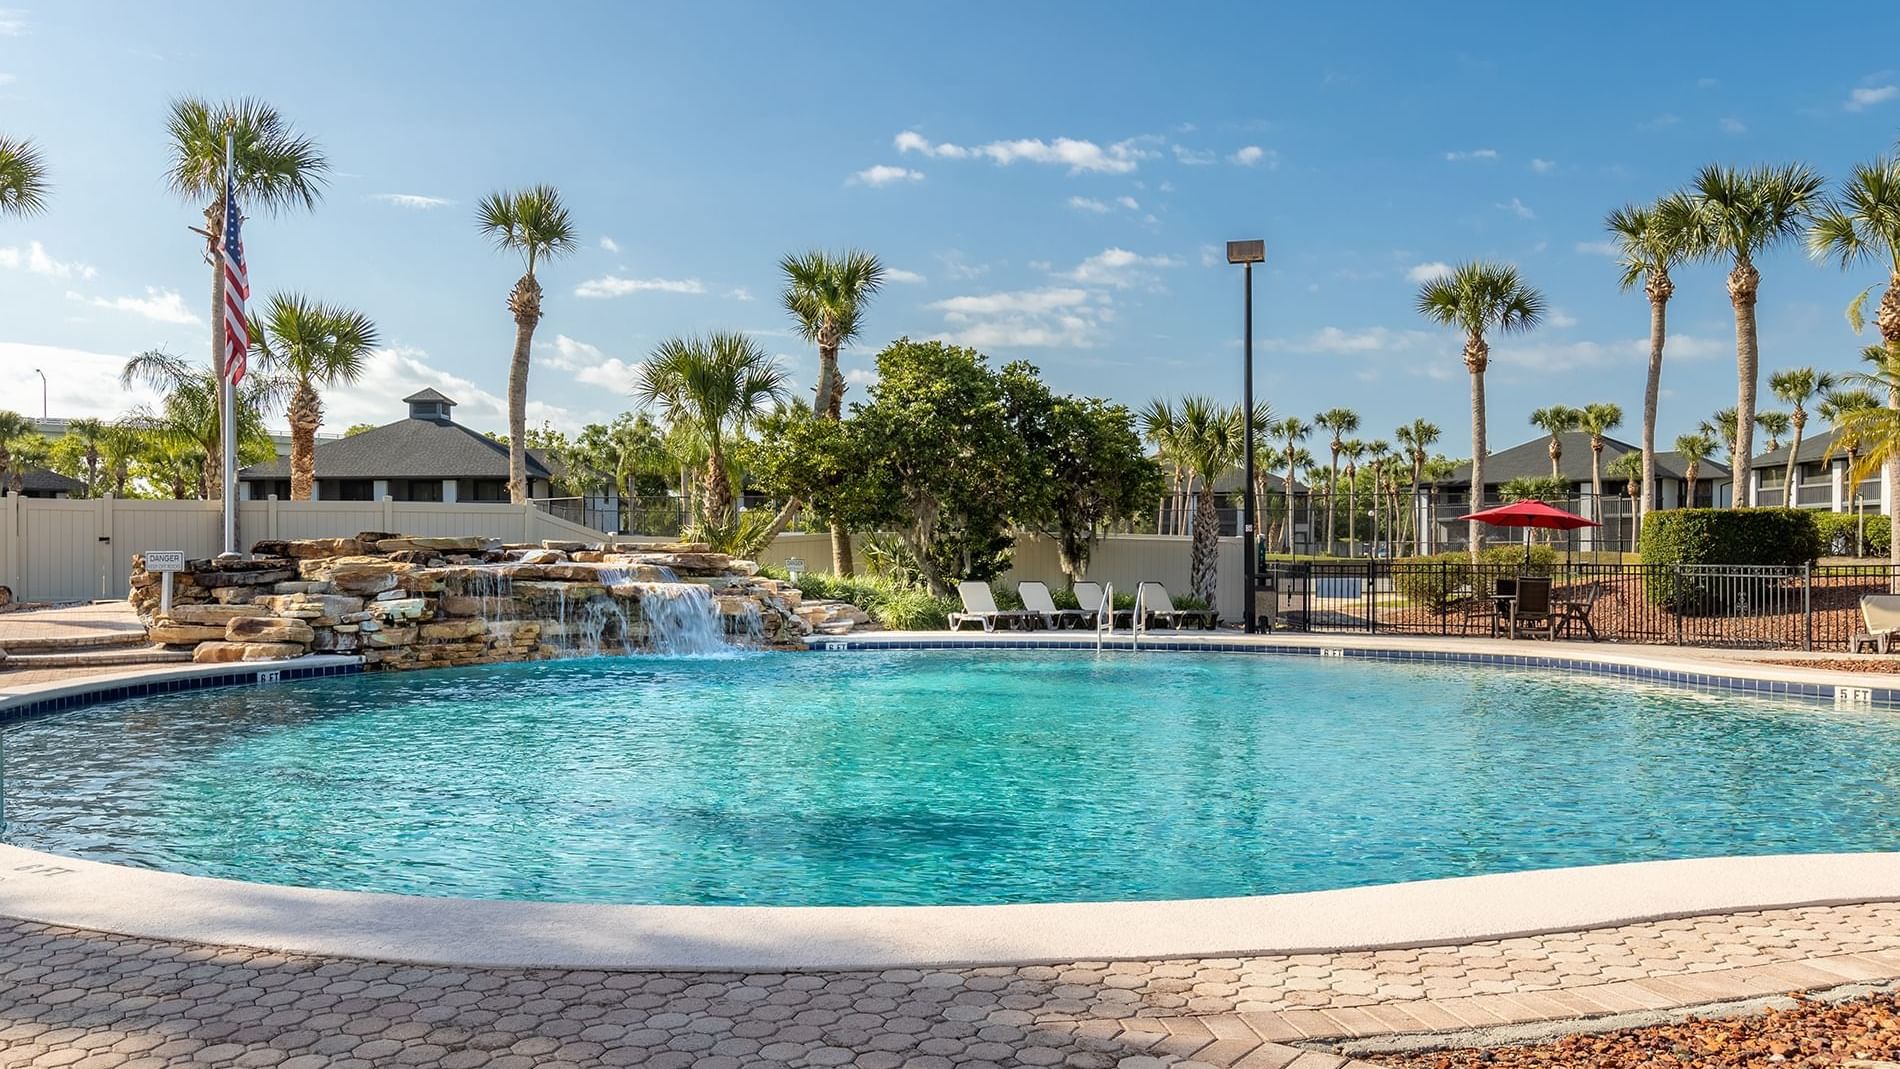  Exterior view of palm coast pool area at Legacy Vacation 